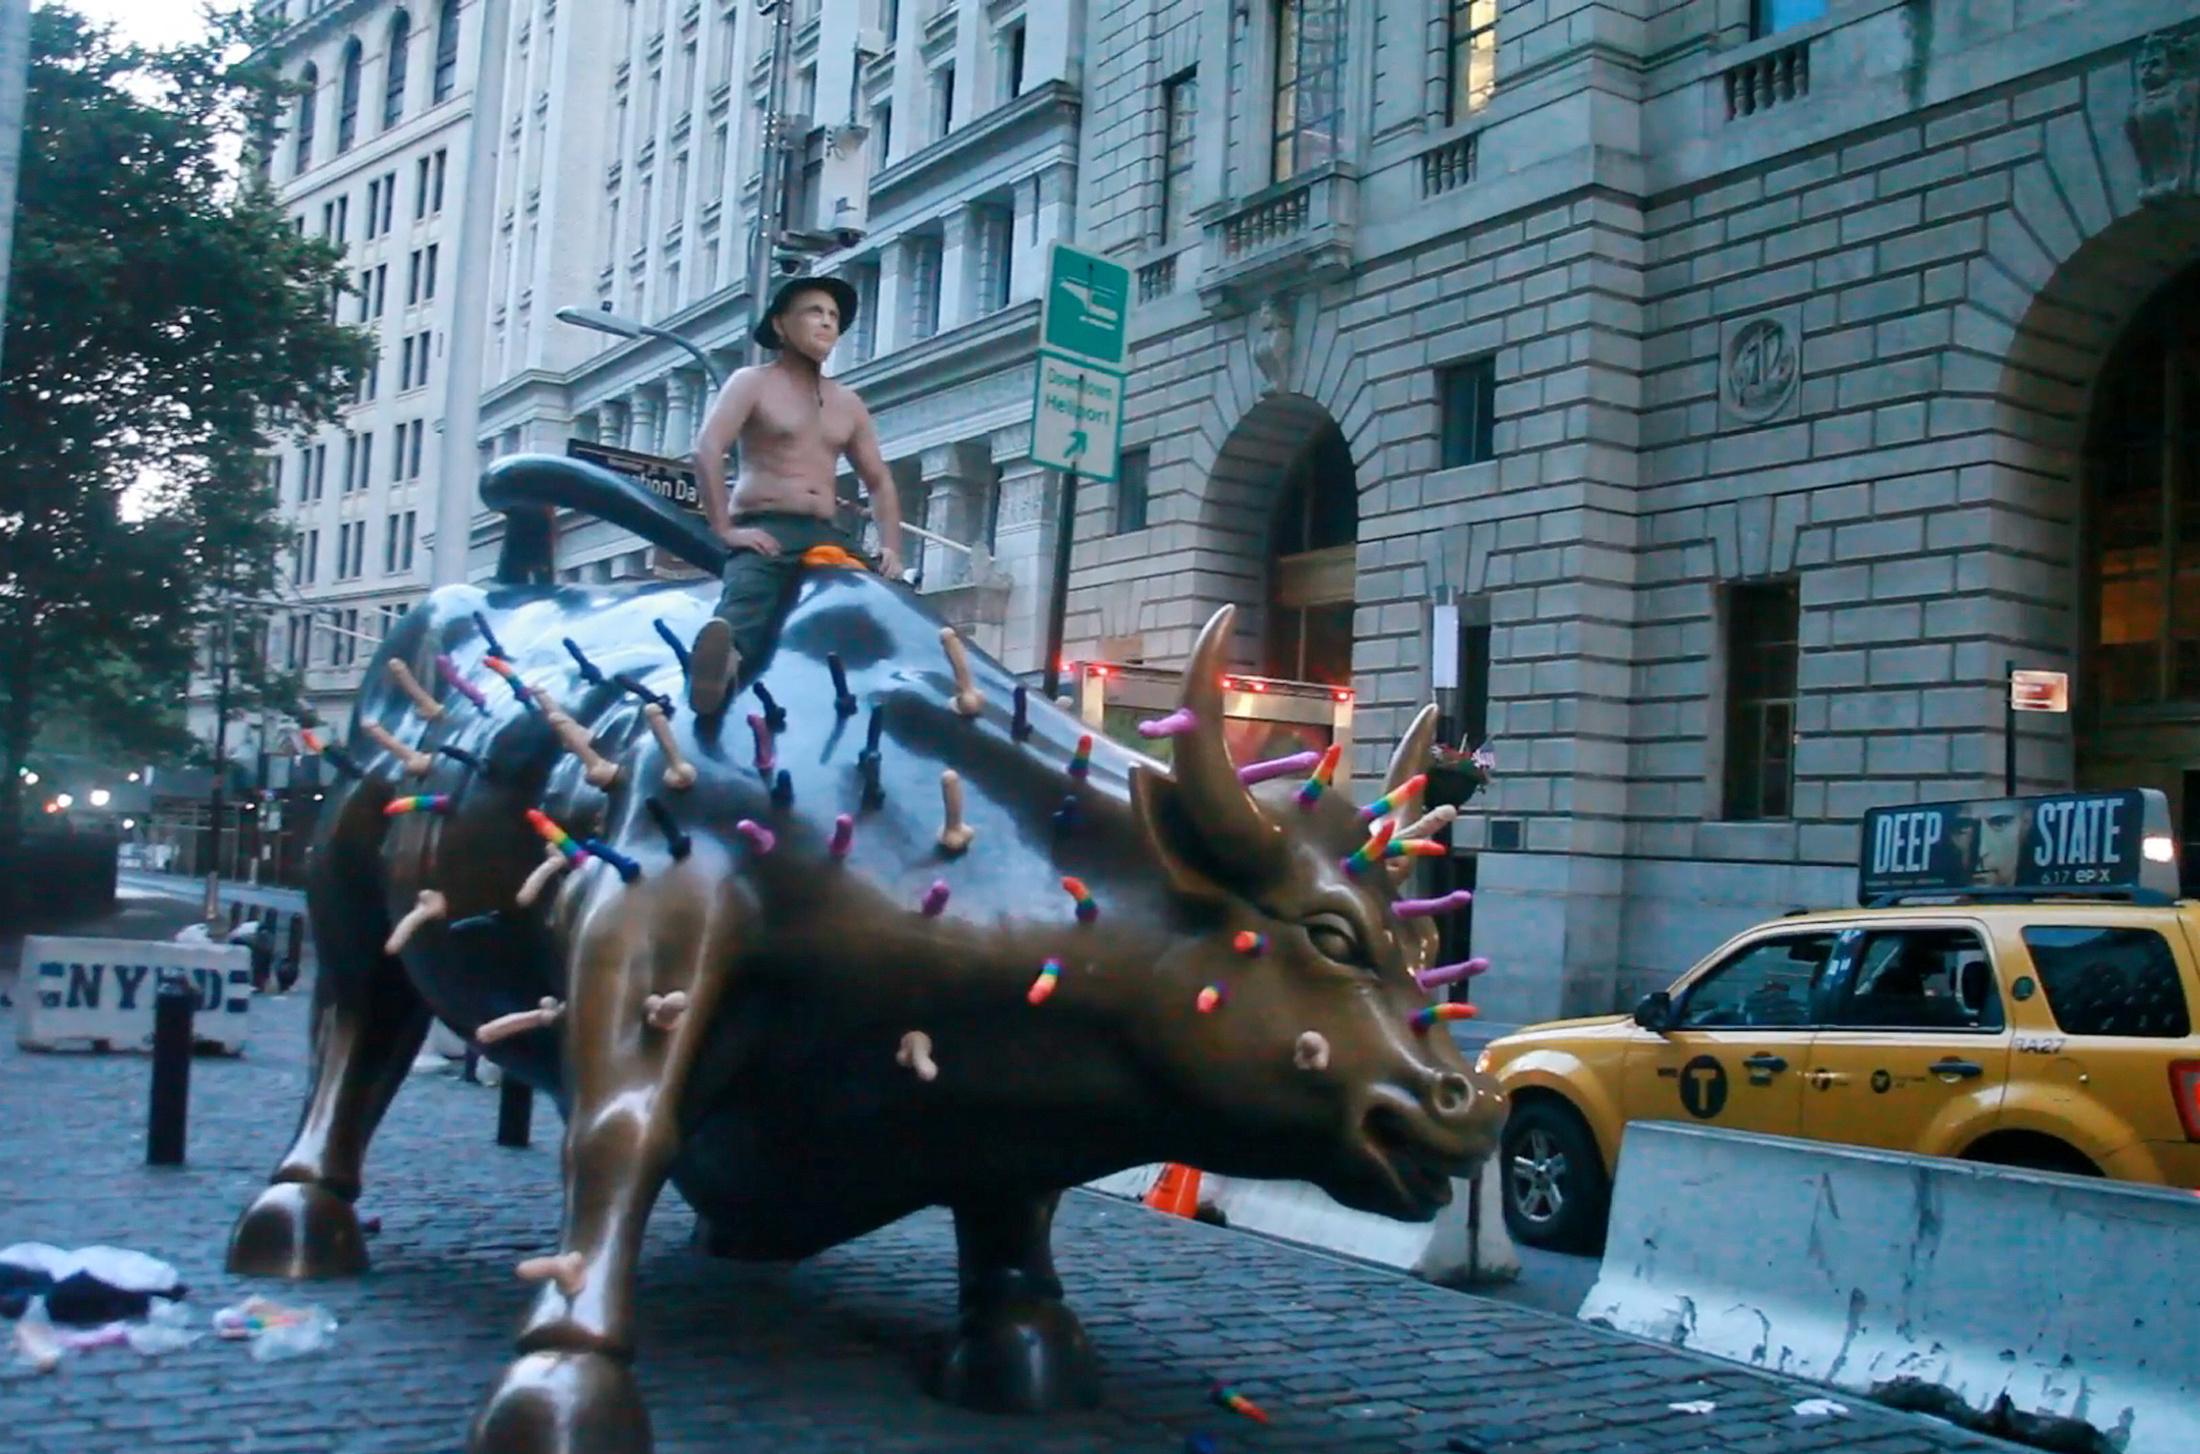 Activist Jeff Jetton, bare chested and wearing a mask to portray Russia's President Vladimir Putin, sits on the Wall Street bull sculpture covered with sex toys in a still image from video taken in New York City, U.S. July 16, 2018.